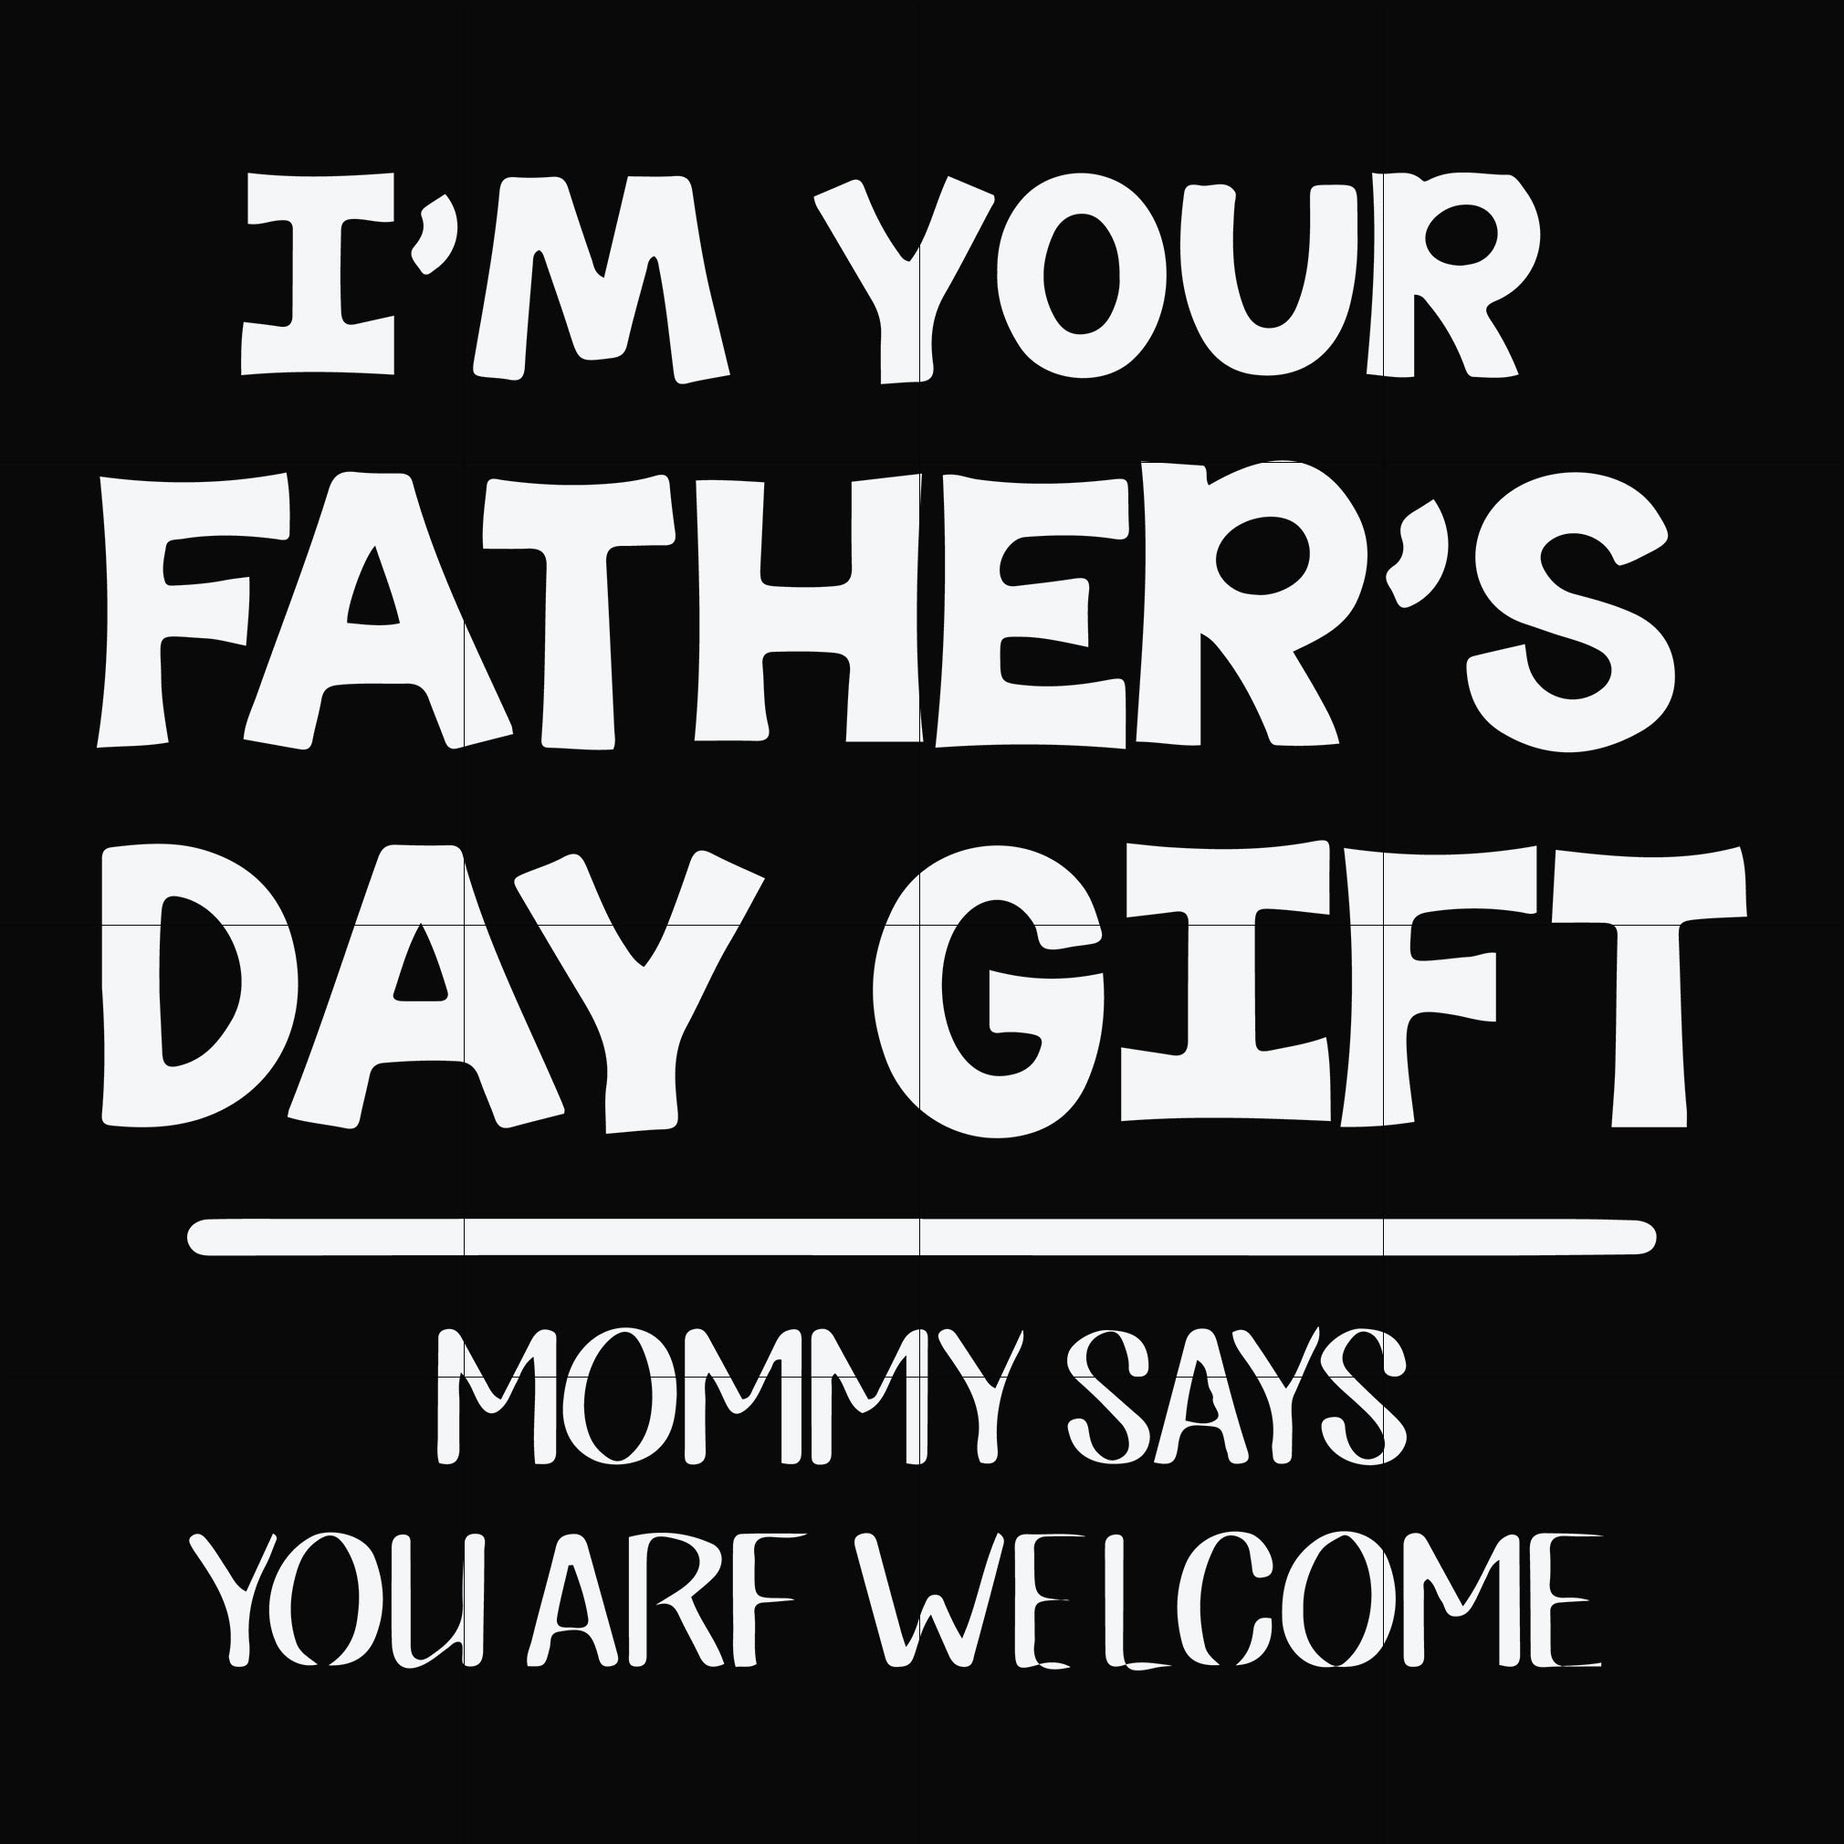 I'm your father's day gift mommy says you are welcome svg, png, dxf, eps file FN000893